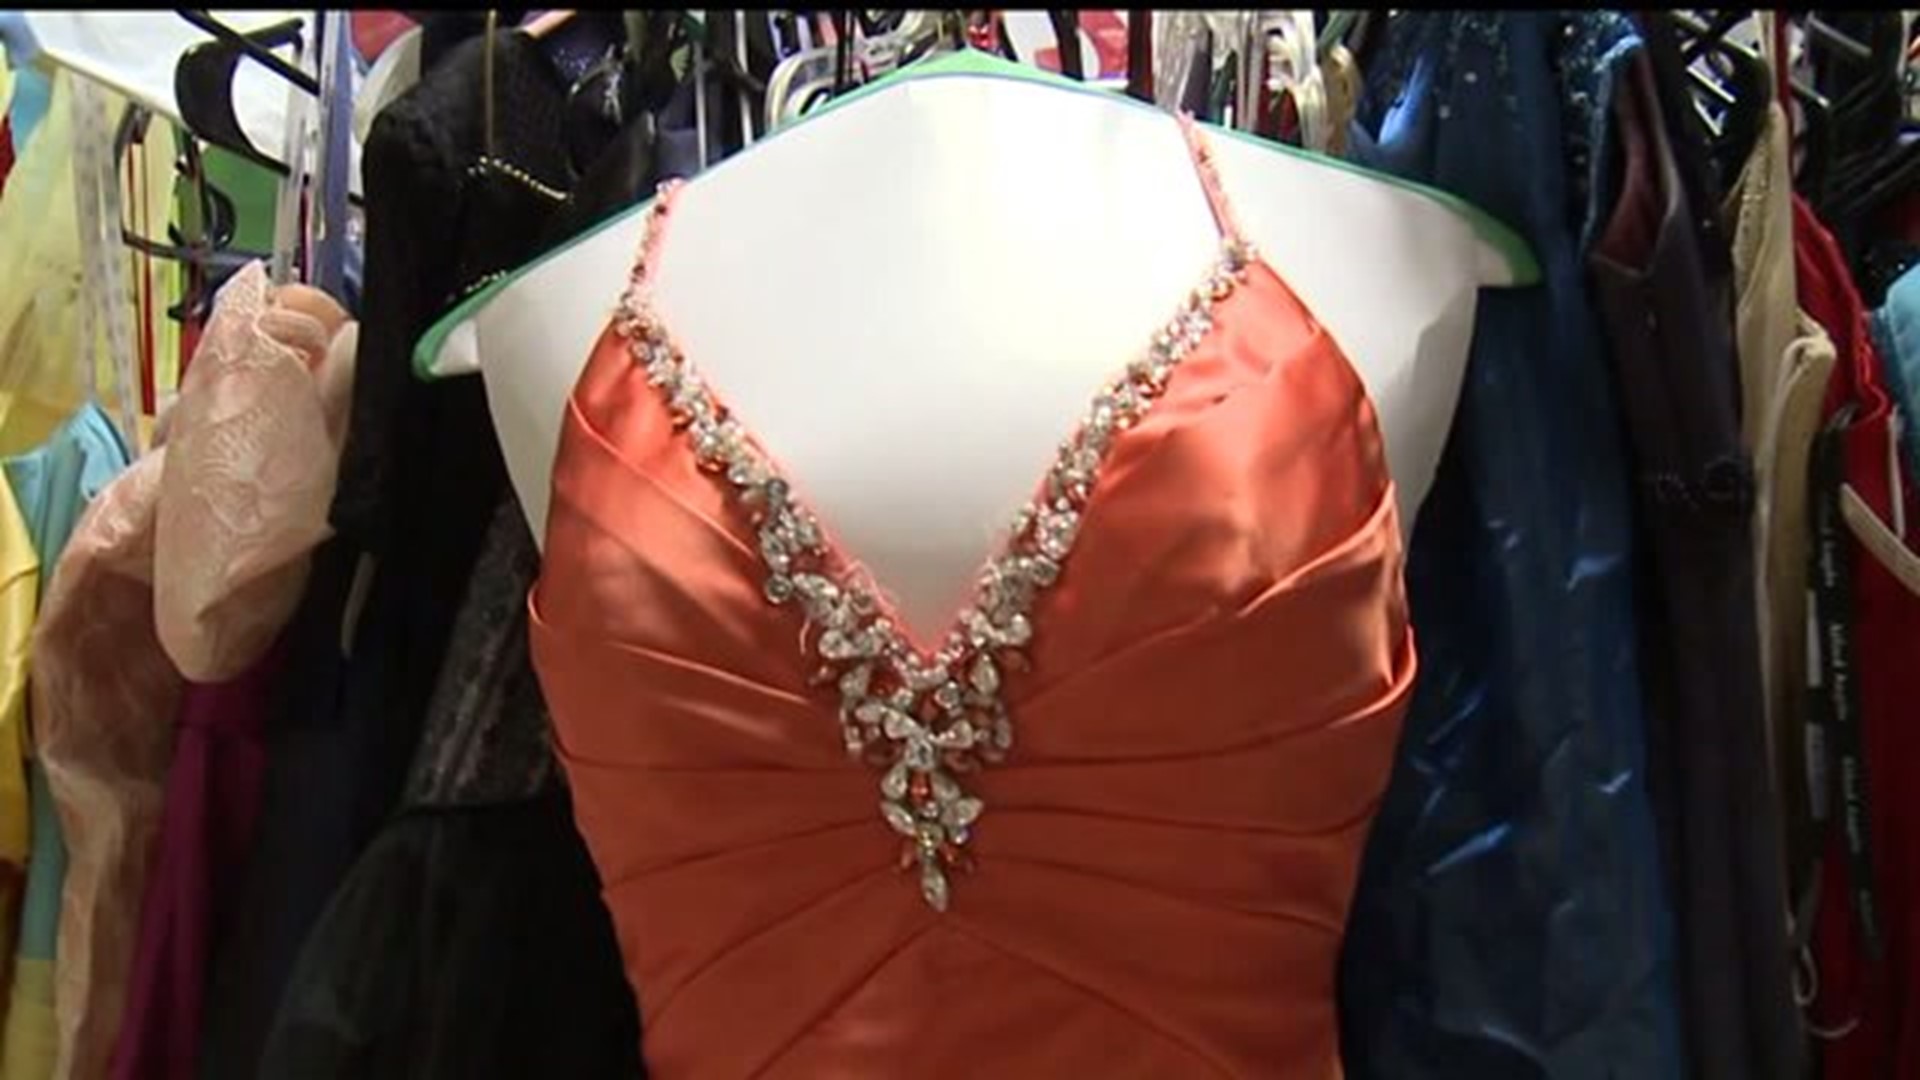 Project Prom Wear is on a mission to make prom special for kids that may not normally be able to go to prom